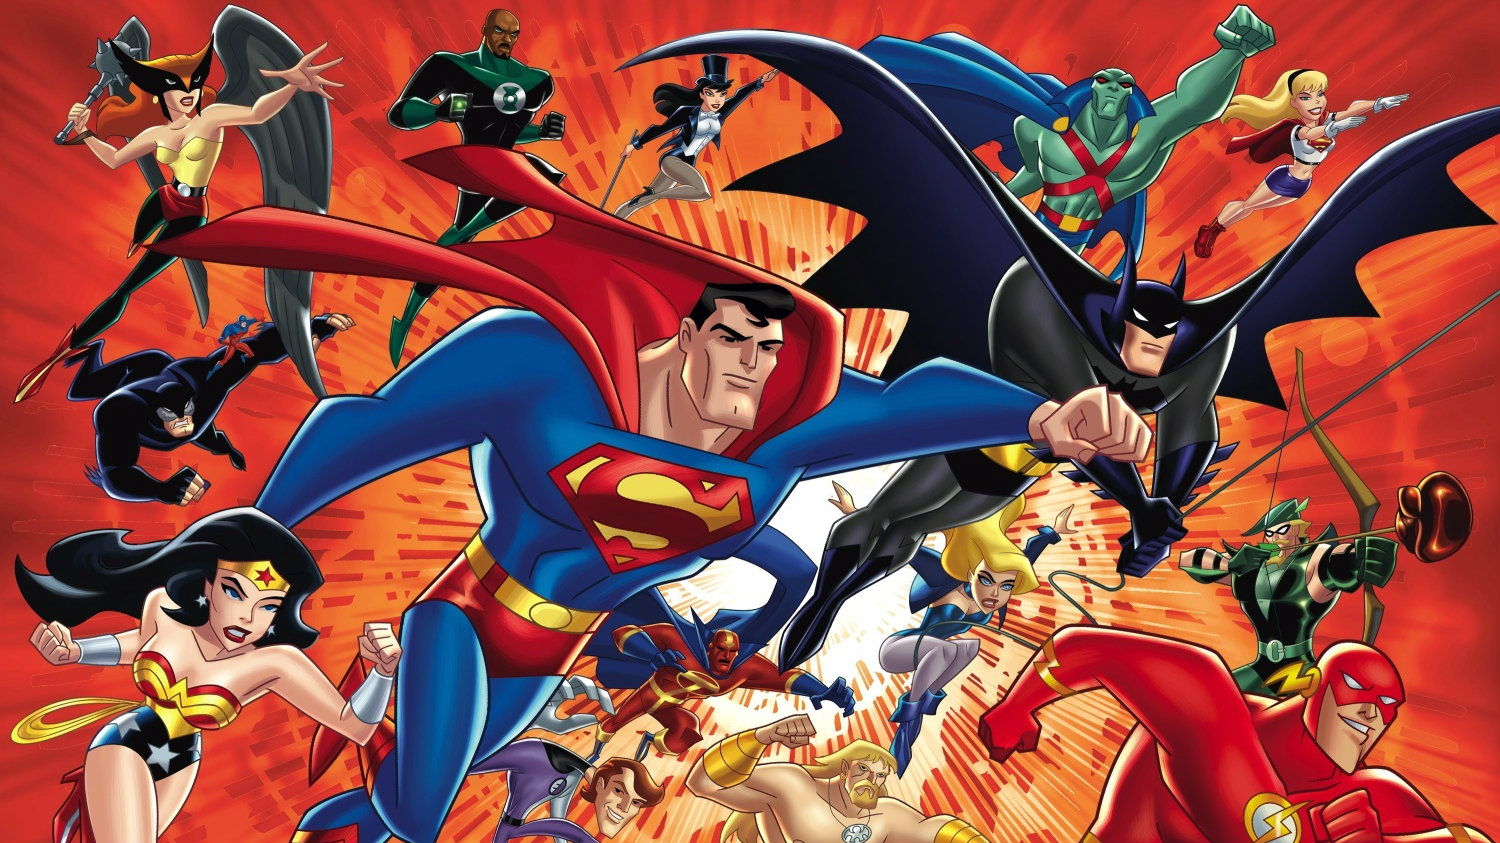 5 Best TV Shows Based on DC Comics | Ranked List of Live Action & Animated